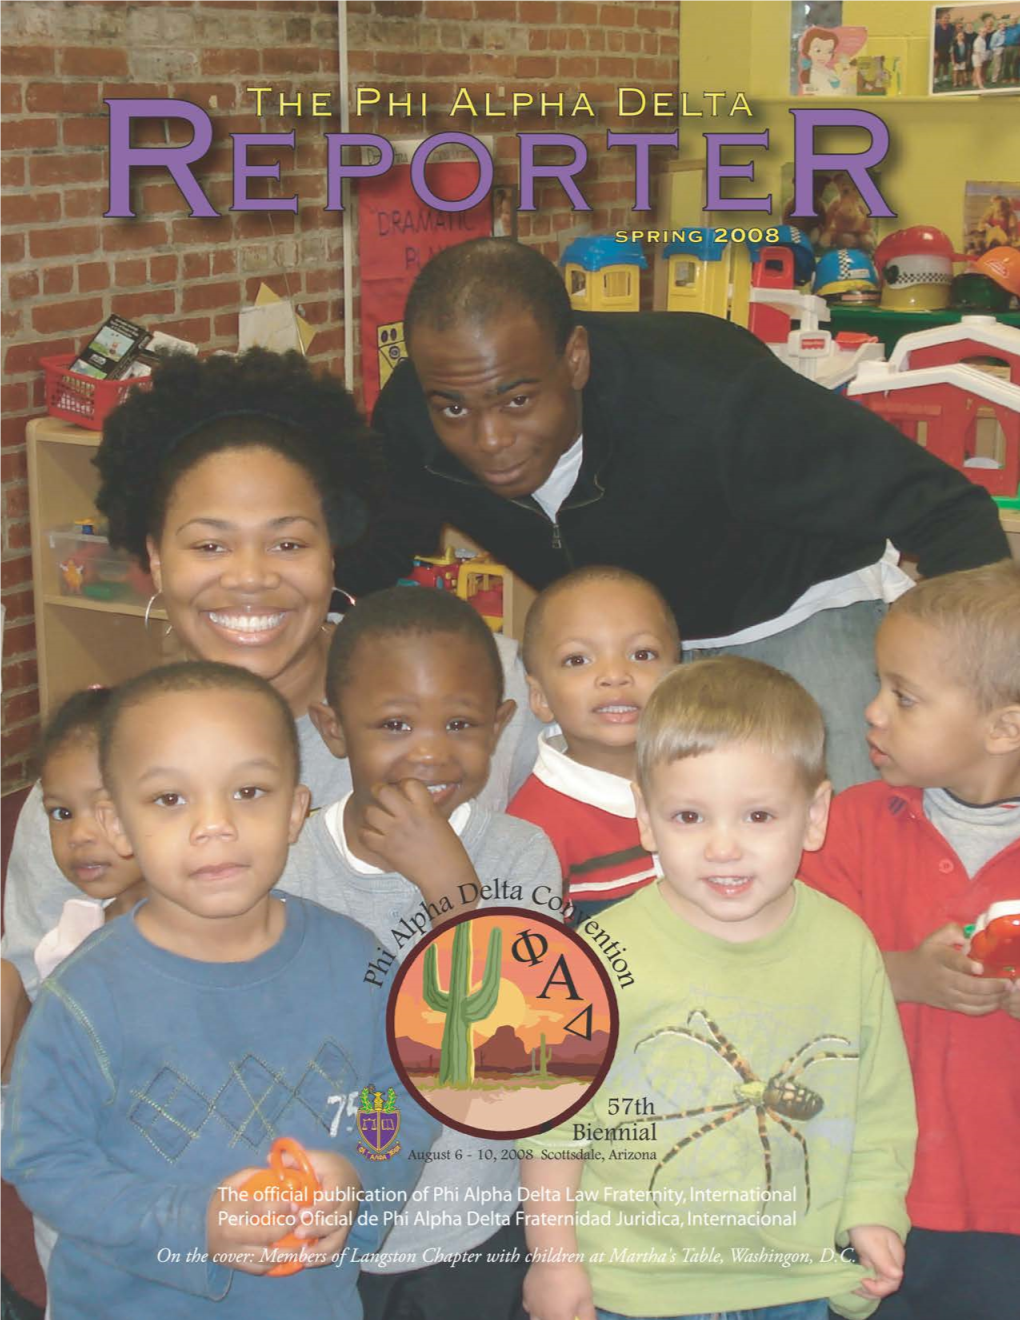 “The Reporter” – Page 1 Details and Registration Form on Pages 17 & 18